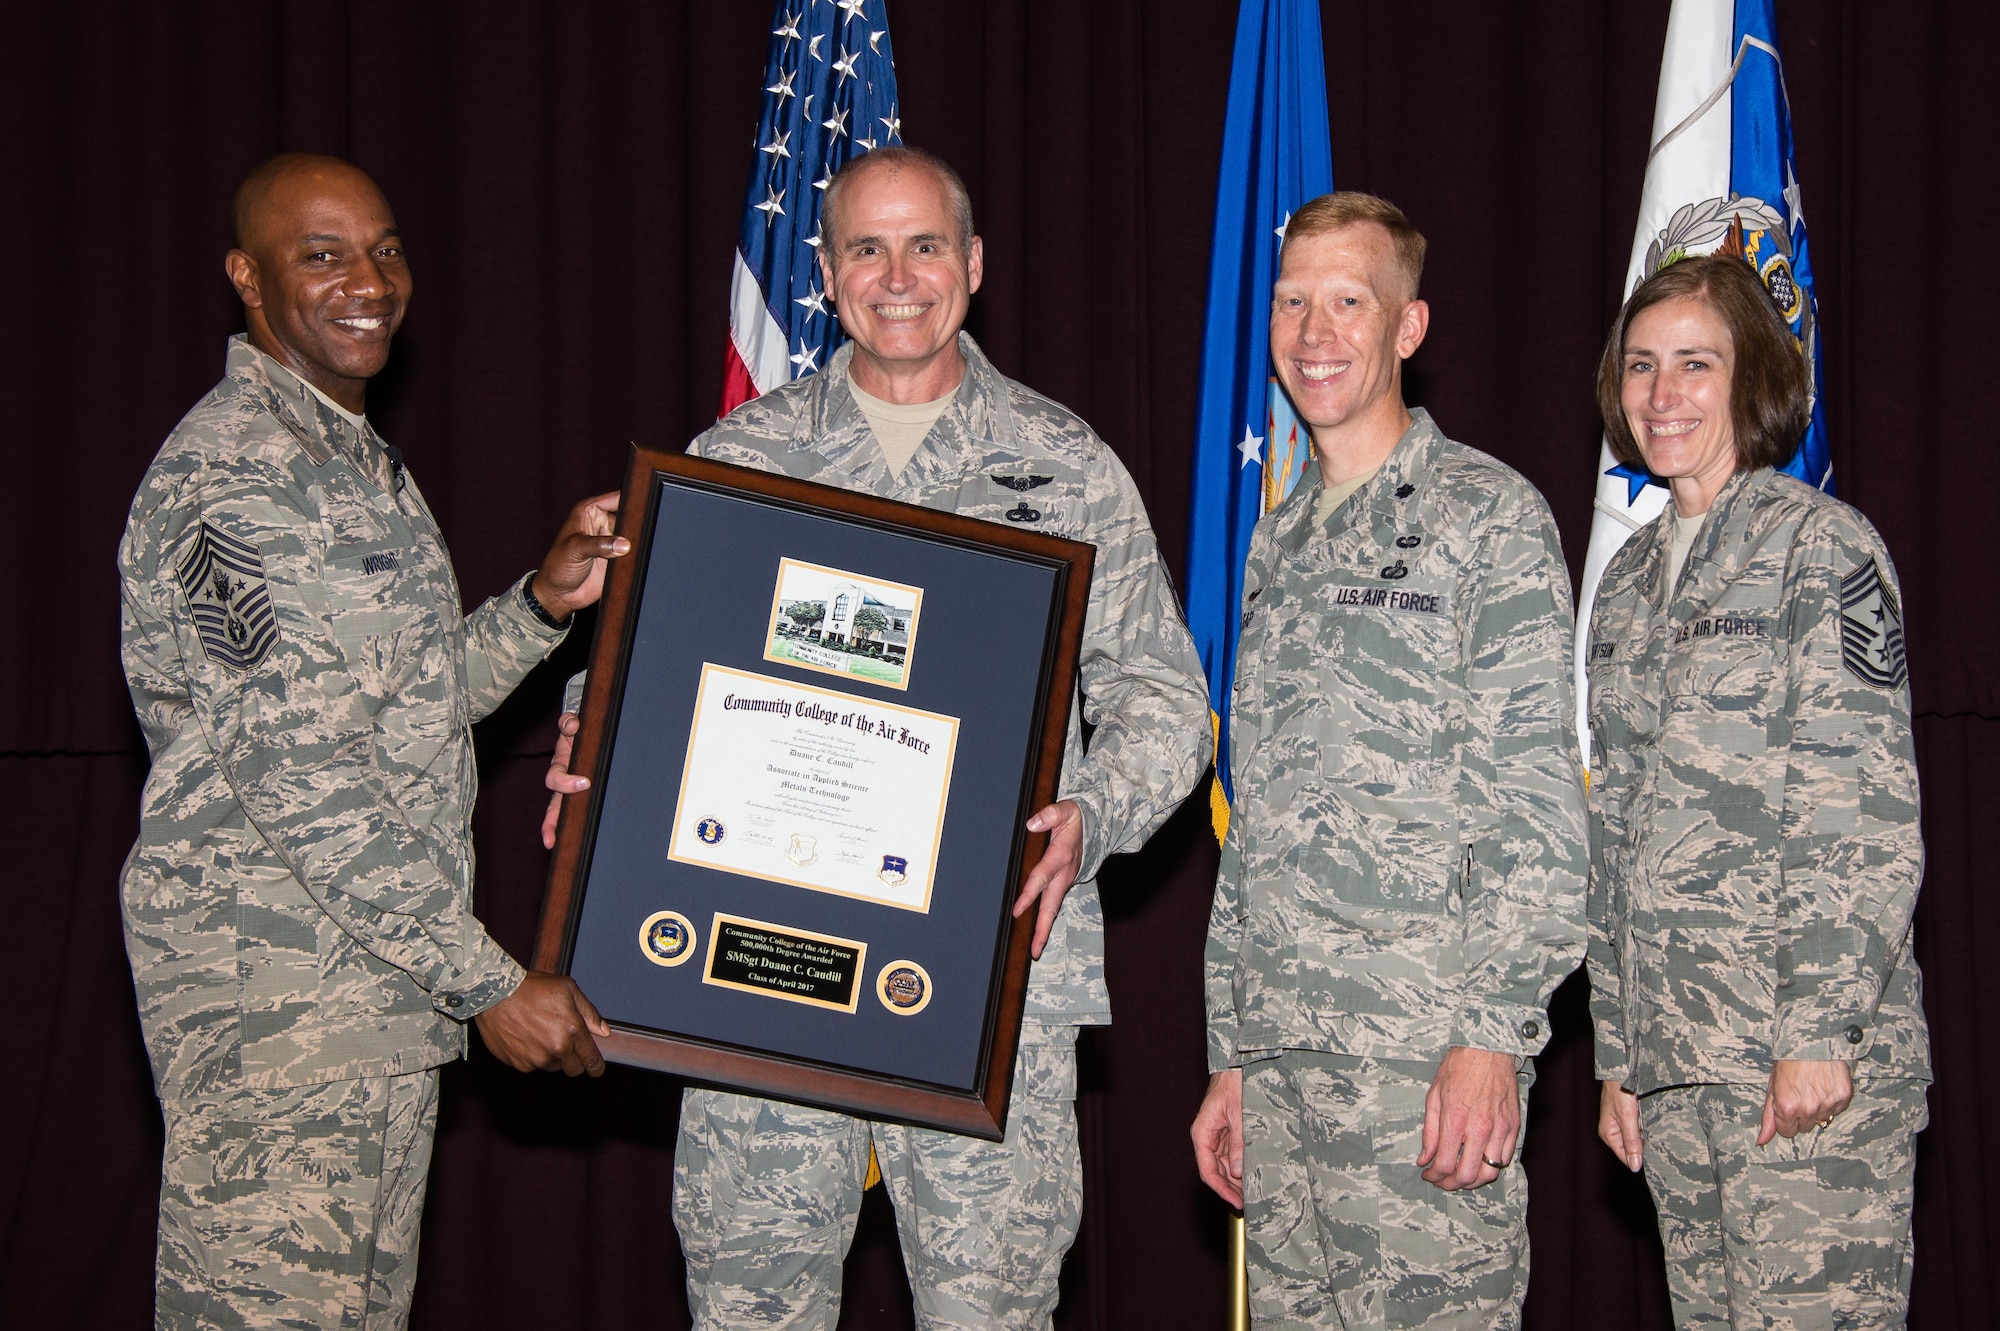 Chief Master Sgt. of the Air Force Kaleth O. Wright, presents Senior Master Sgt. Duane Caudill, 302nd Maintenance Group career advisor, with the 500,000th Community College of the Air Force degree, April 21, 2017, Maxwell Air Force Base, Ala. The Community College of the Air Force commandant, Lt. Col. Nathan J. Leap, and Chief Master Sgt. Vicki Robertson, 302 Airlift Wing Command Chief, also participated in the historic presentation. (US Air Force photo by Melanie Rodgers Cox)